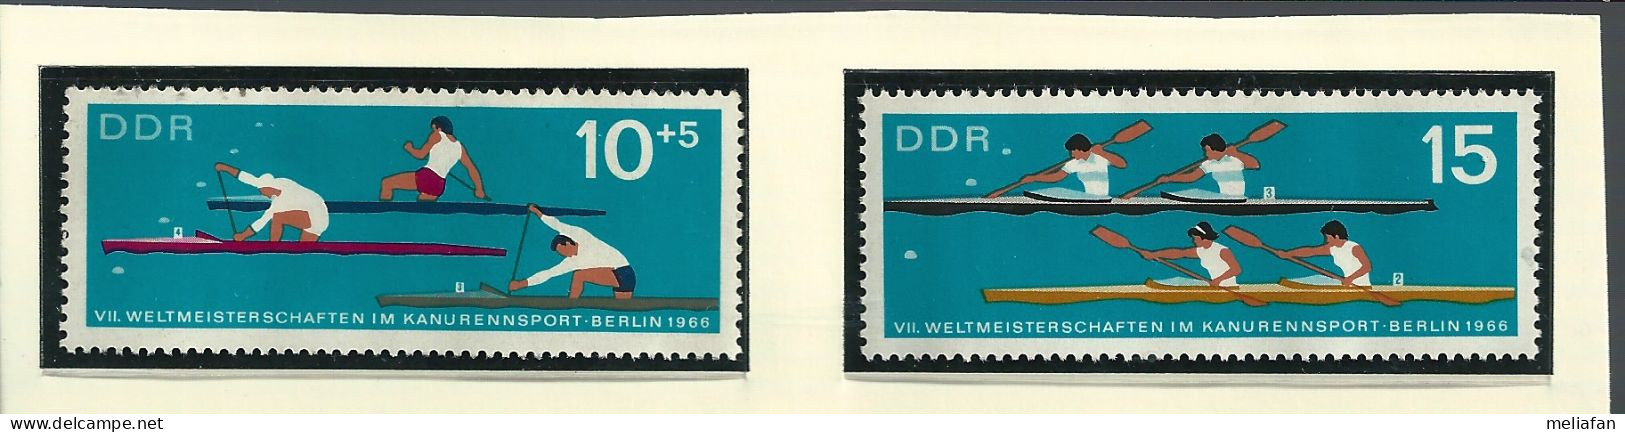 T801 - TIMBRES DDR - AVIRON - Rudersport